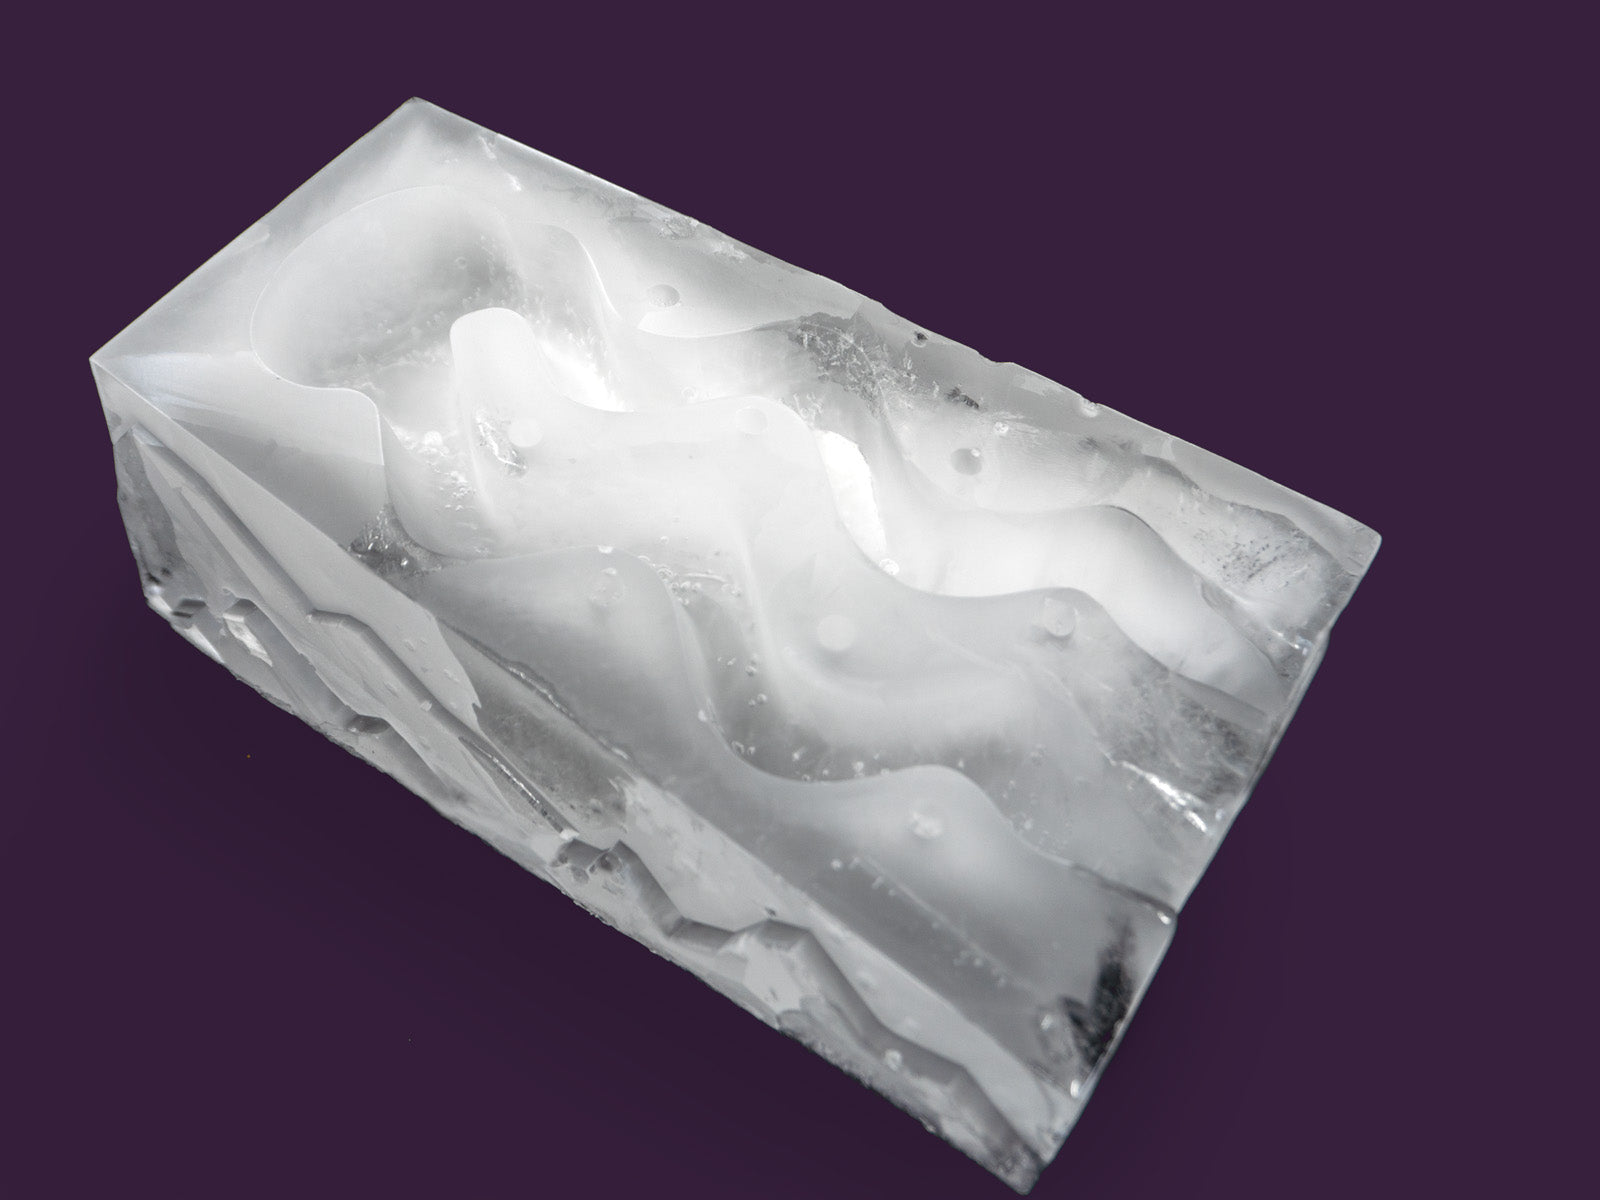 Photo of the ice shot slope slalom, with 2 funnels within the ice through which liquor is poured to chill it. The image is set against a purple backdrop. The ice is viewed from the front right on an angle.